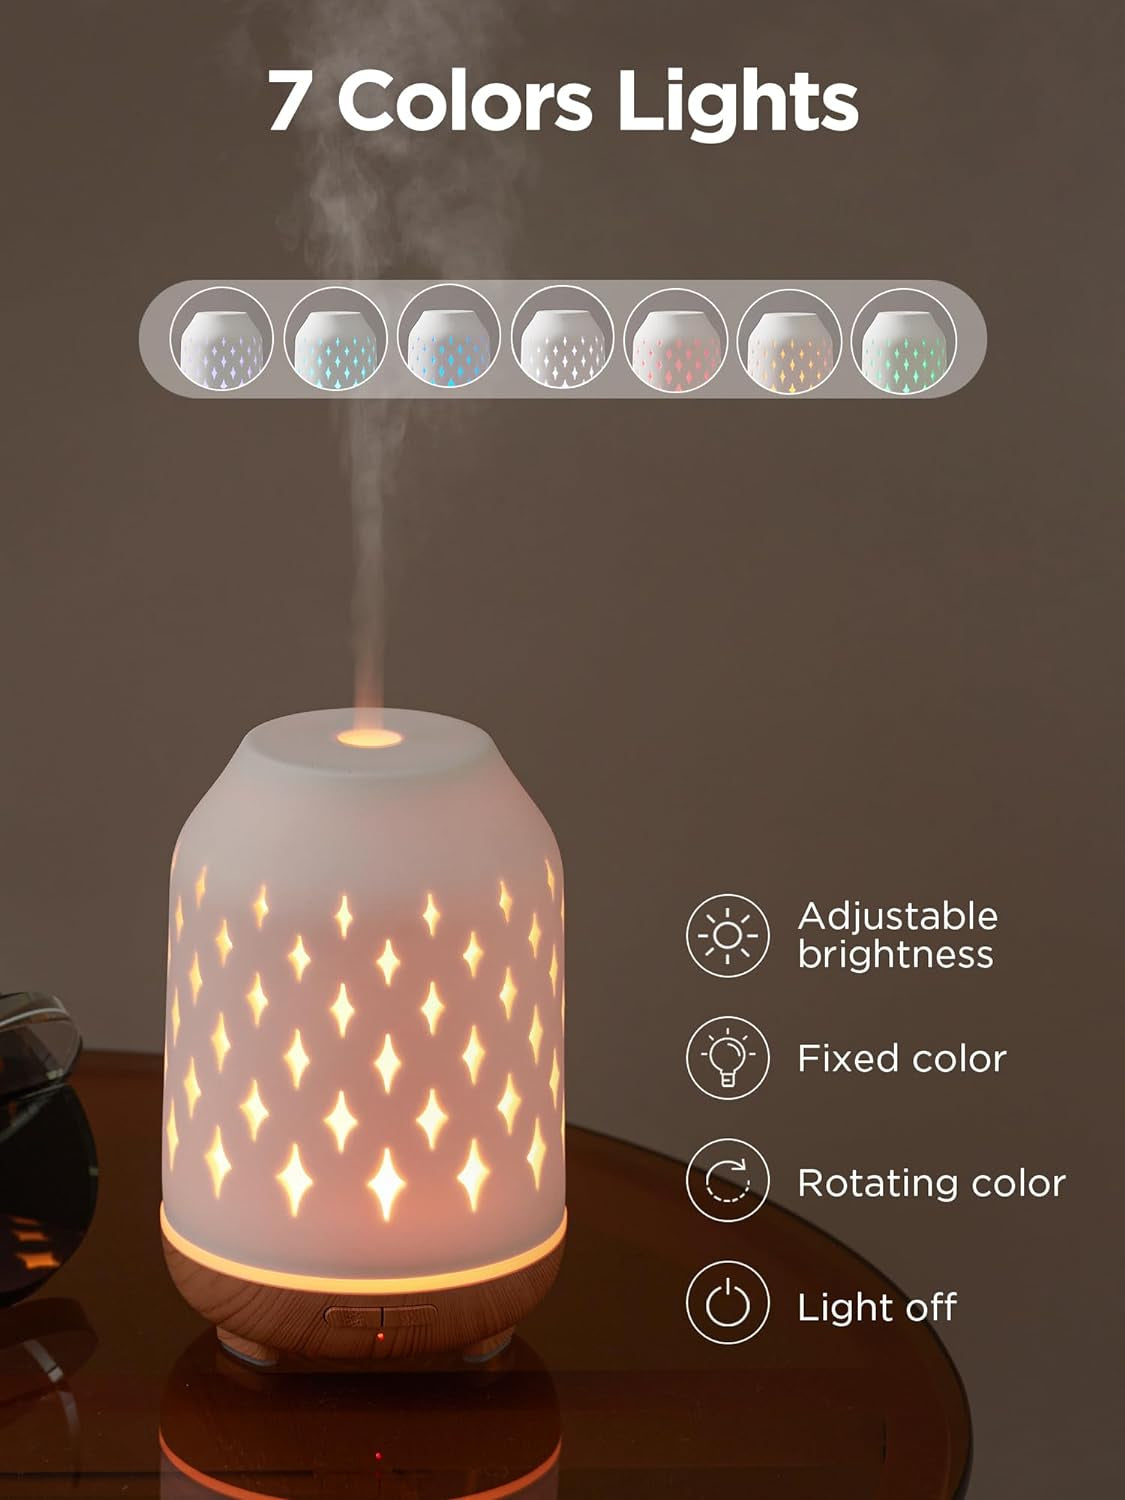 Aromatherapy Diffuser, 150Ml Ceramic Diffuser Ultrasonic Humidifier Cool Mist Essential Oil Diffusers for Home Air Diffuser with 2 Mist Modes Waterless Auto Off, White